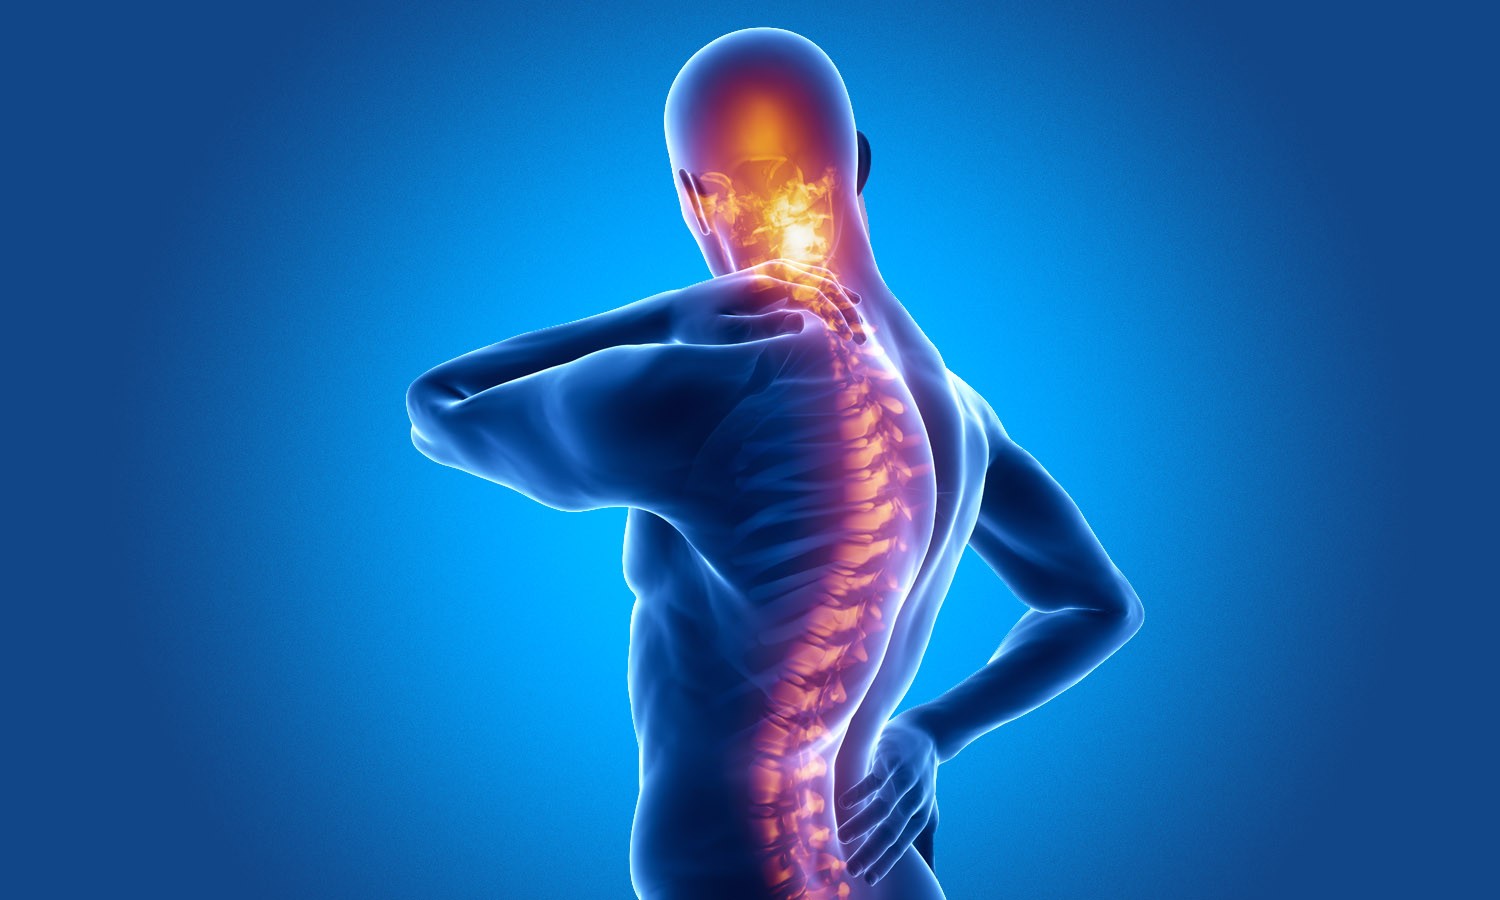 You are currently viewing Homeopathy Treatment of Ankylosing Spondylitis Online-Homeopathy Medicine for Ankylosing Spondylitis